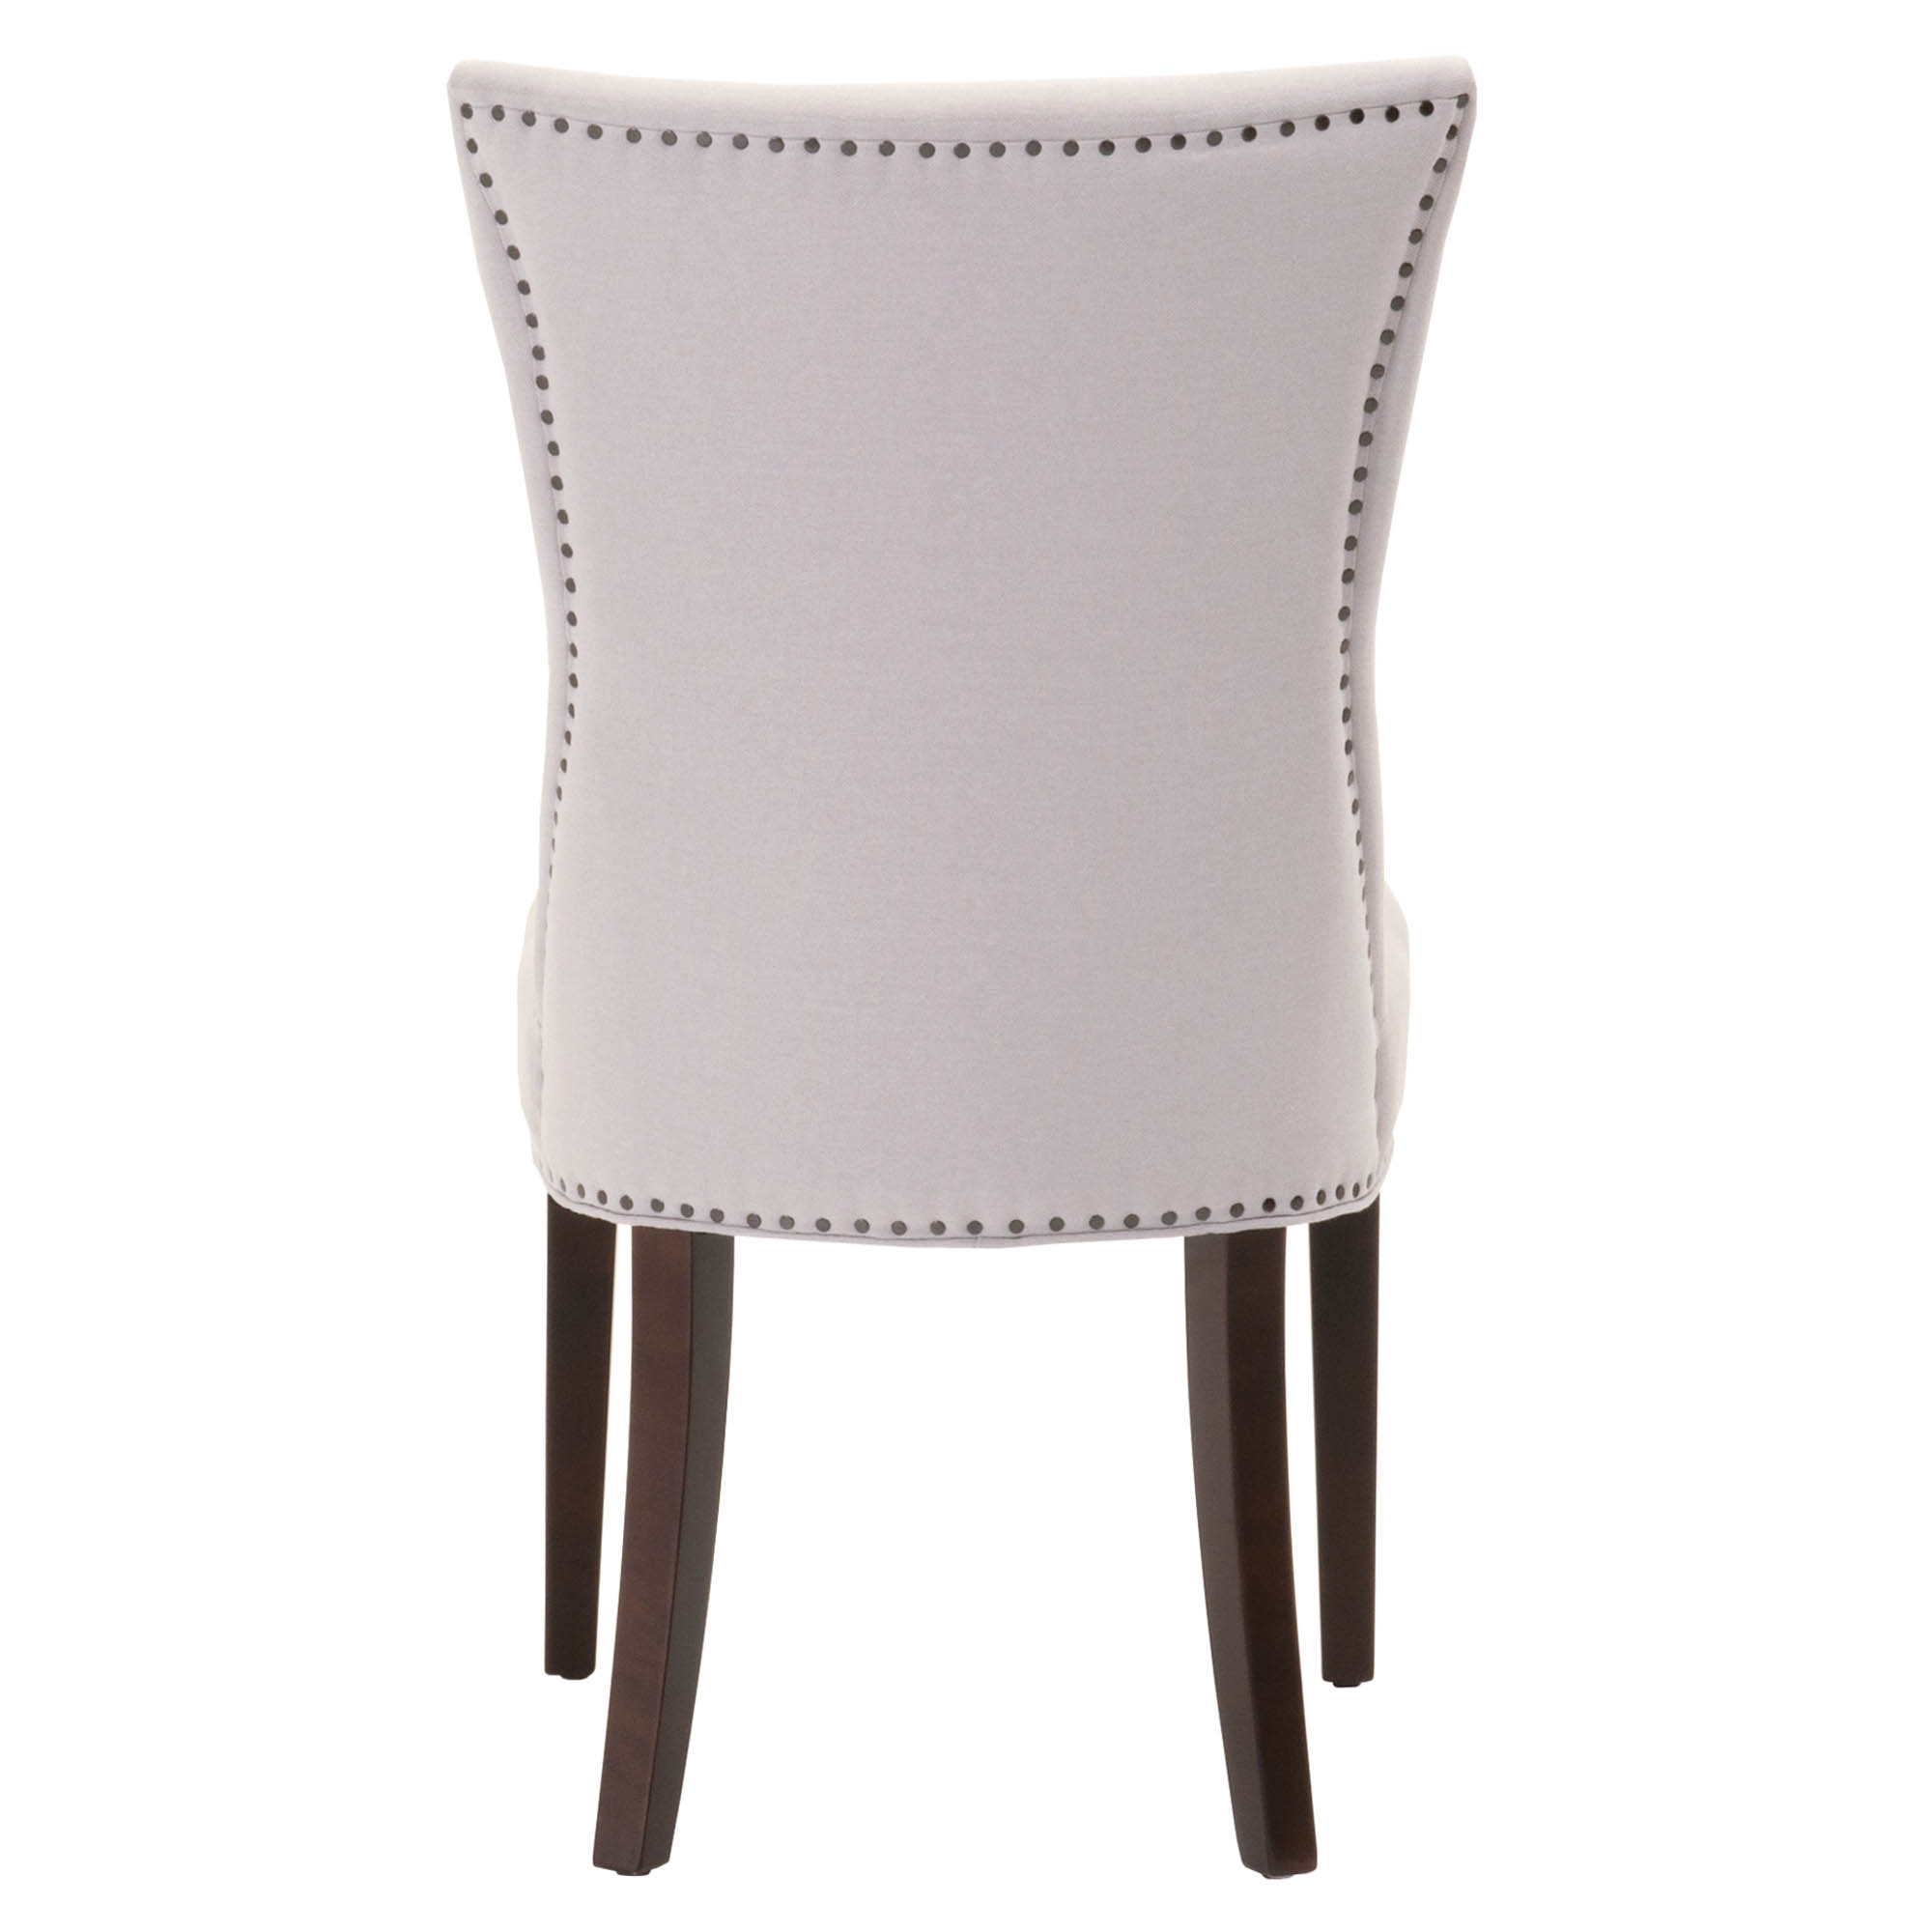 Avery Dining Chair, Set of 2 - Image 4